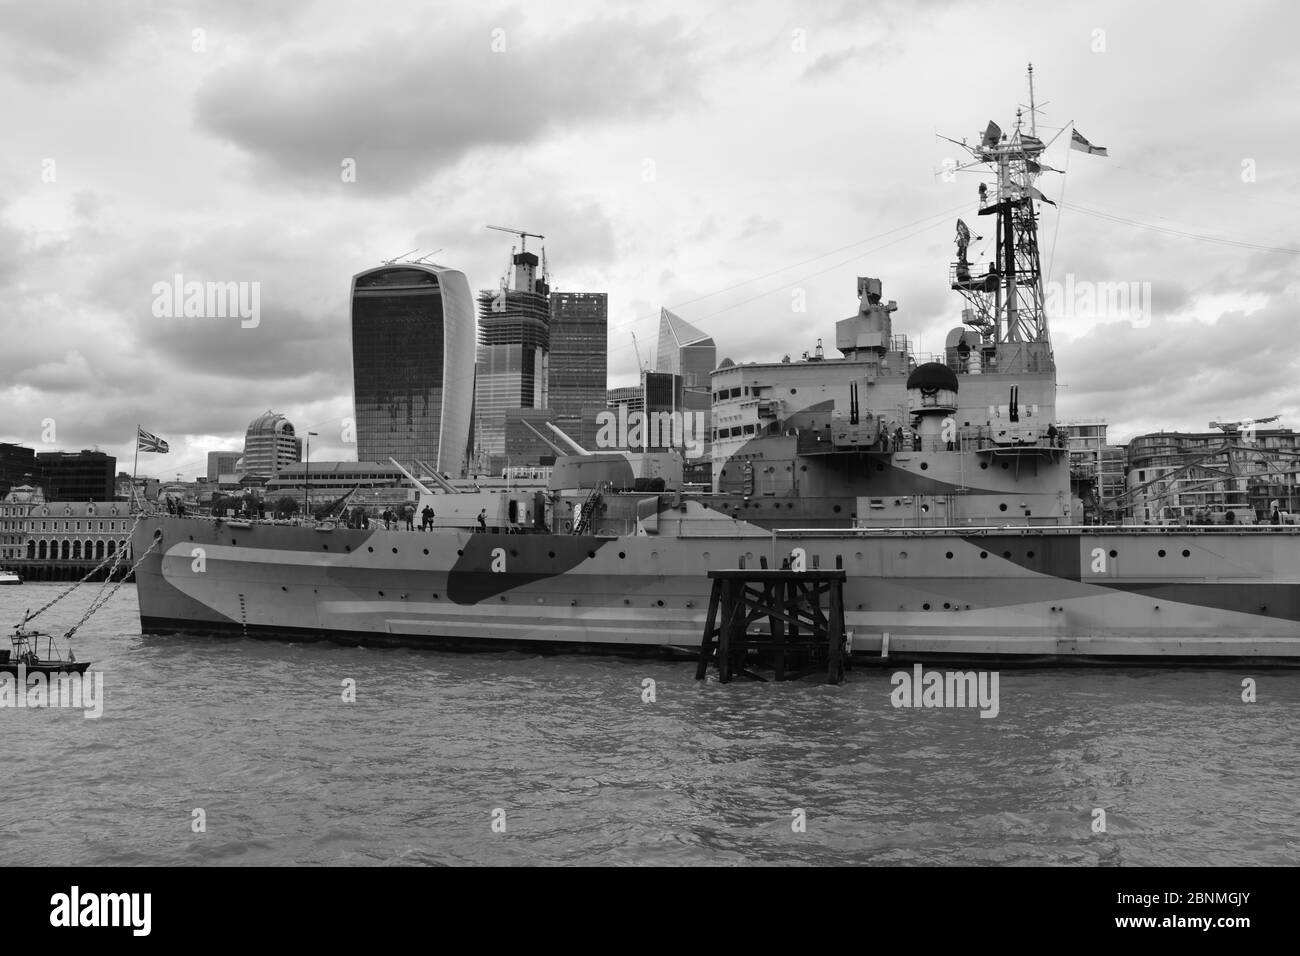 HMS Belfast museum ship in the River Thames, London, England, UK Stock Photo